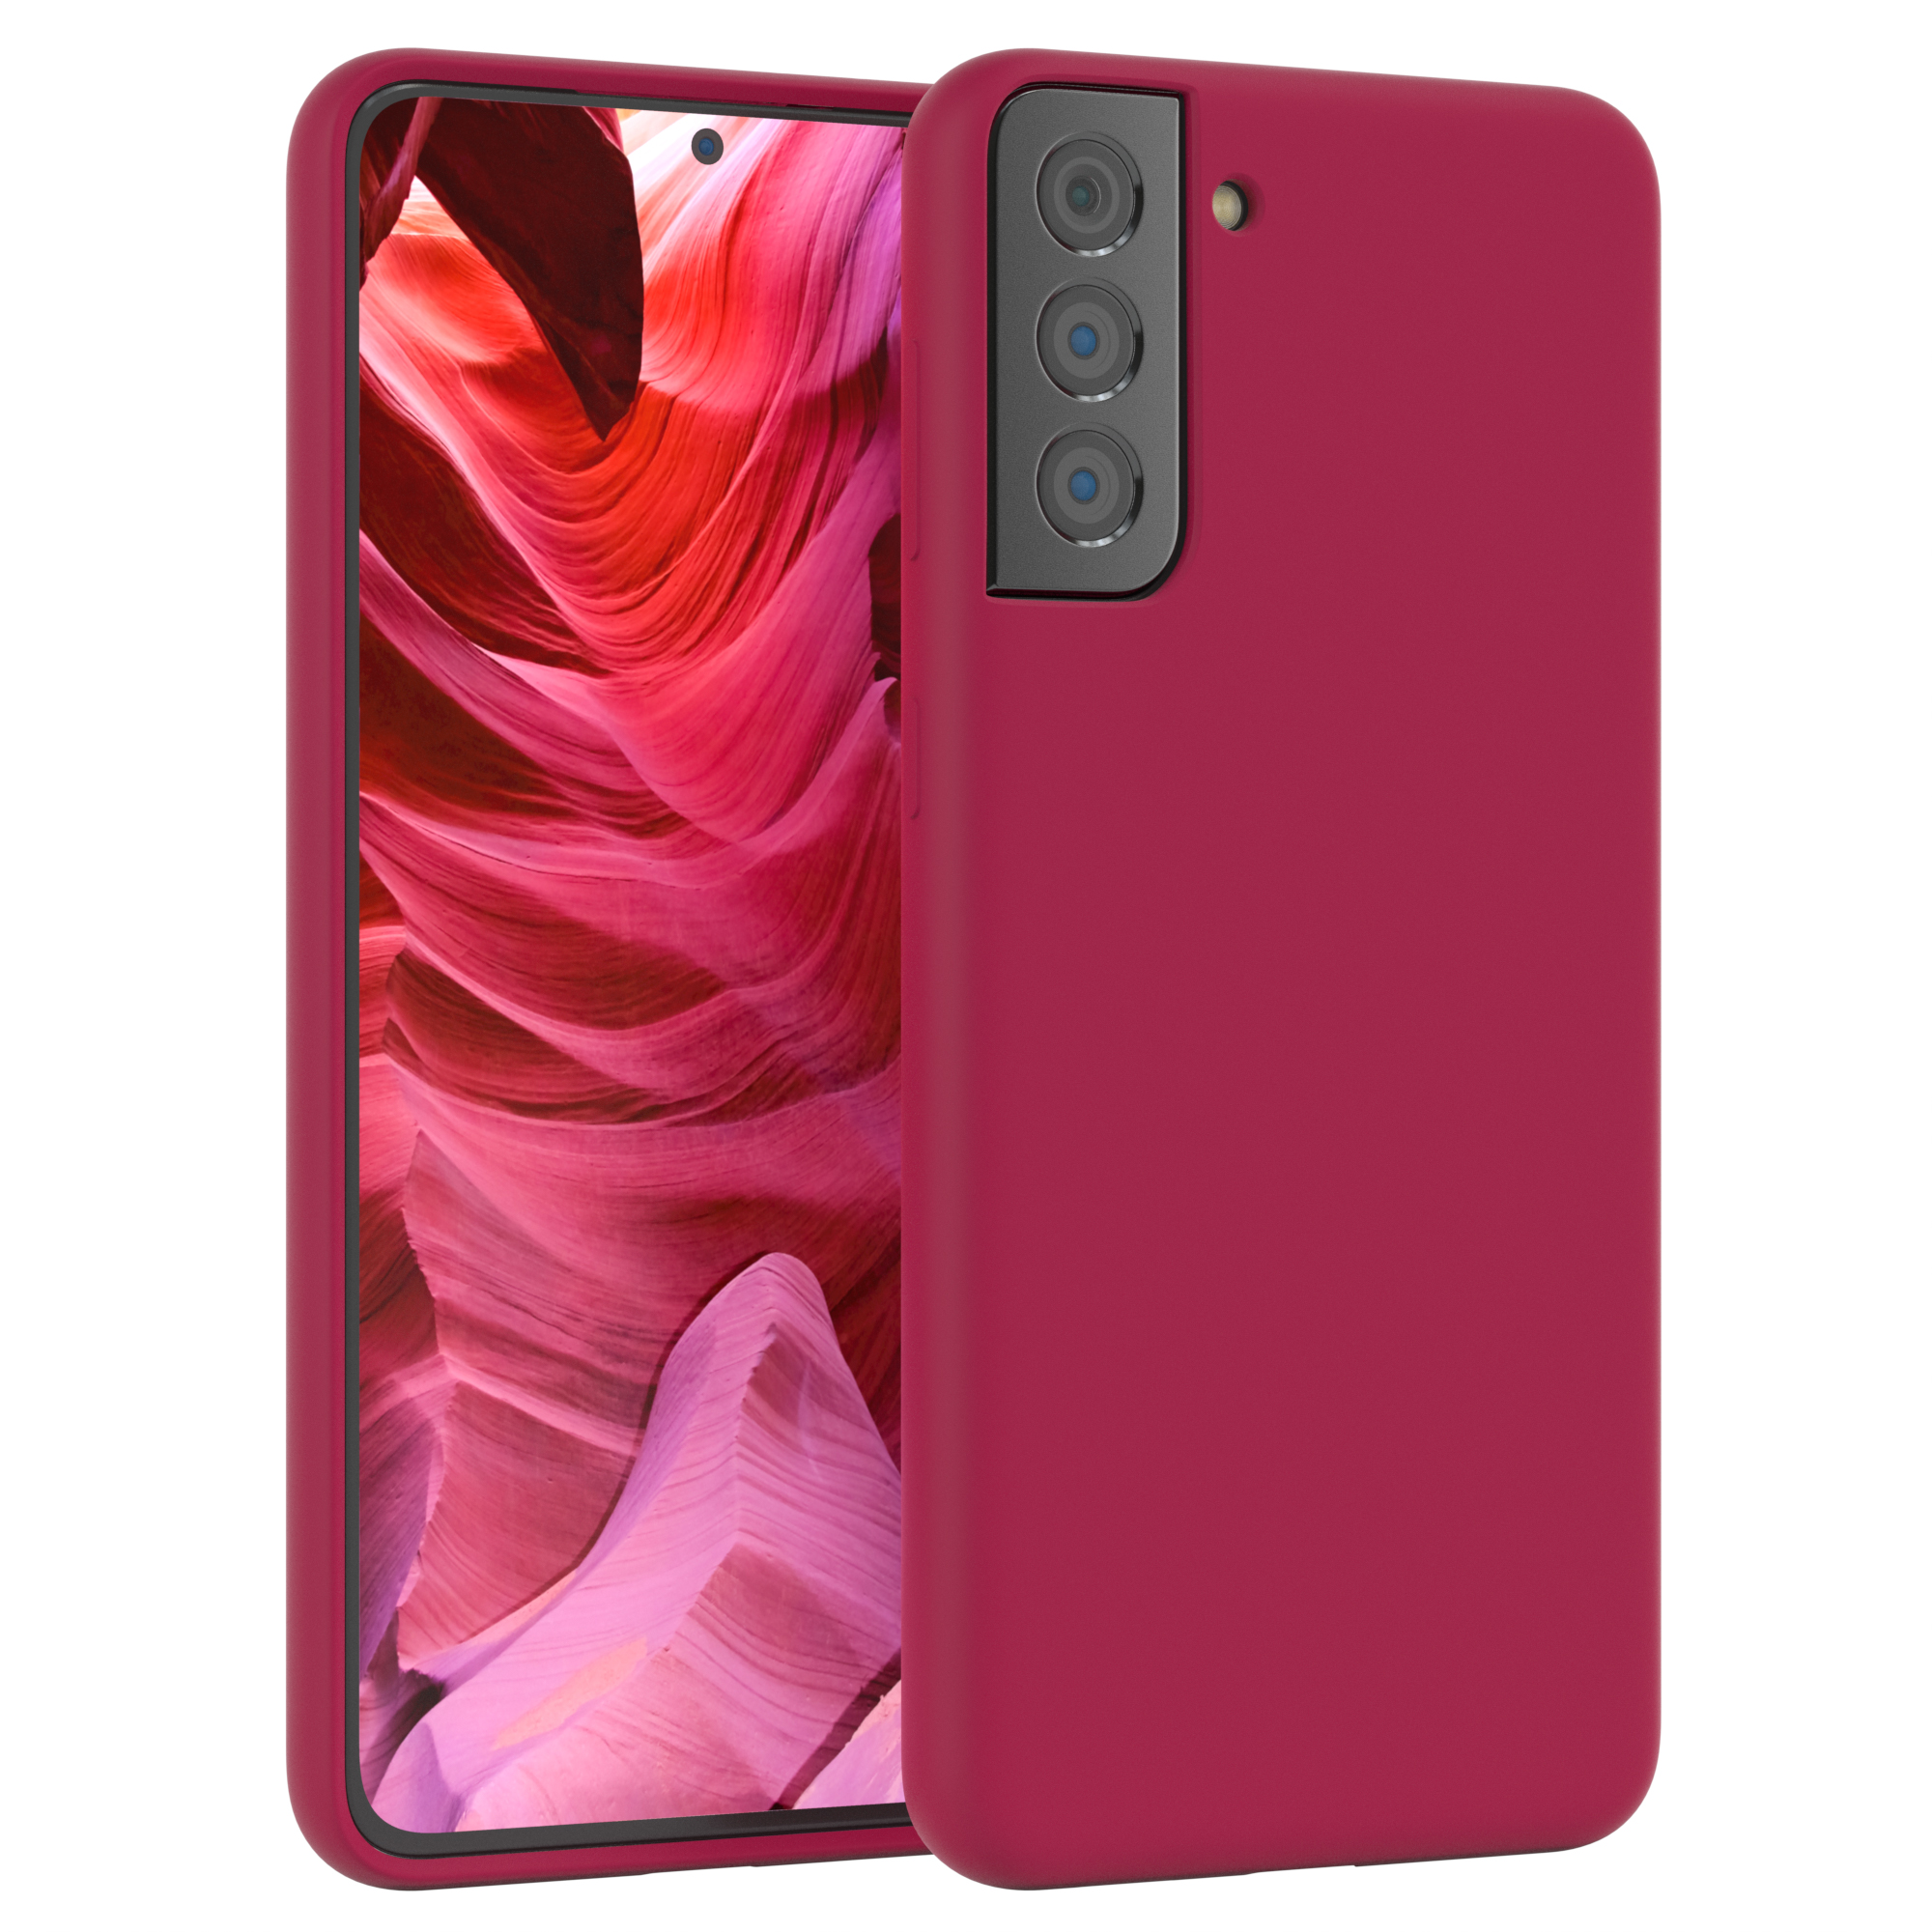 Silikon Handycase, Galaxy / Backcover, Samsung, Beere 5G, Plus CASE S21 Premium Rot EAZY